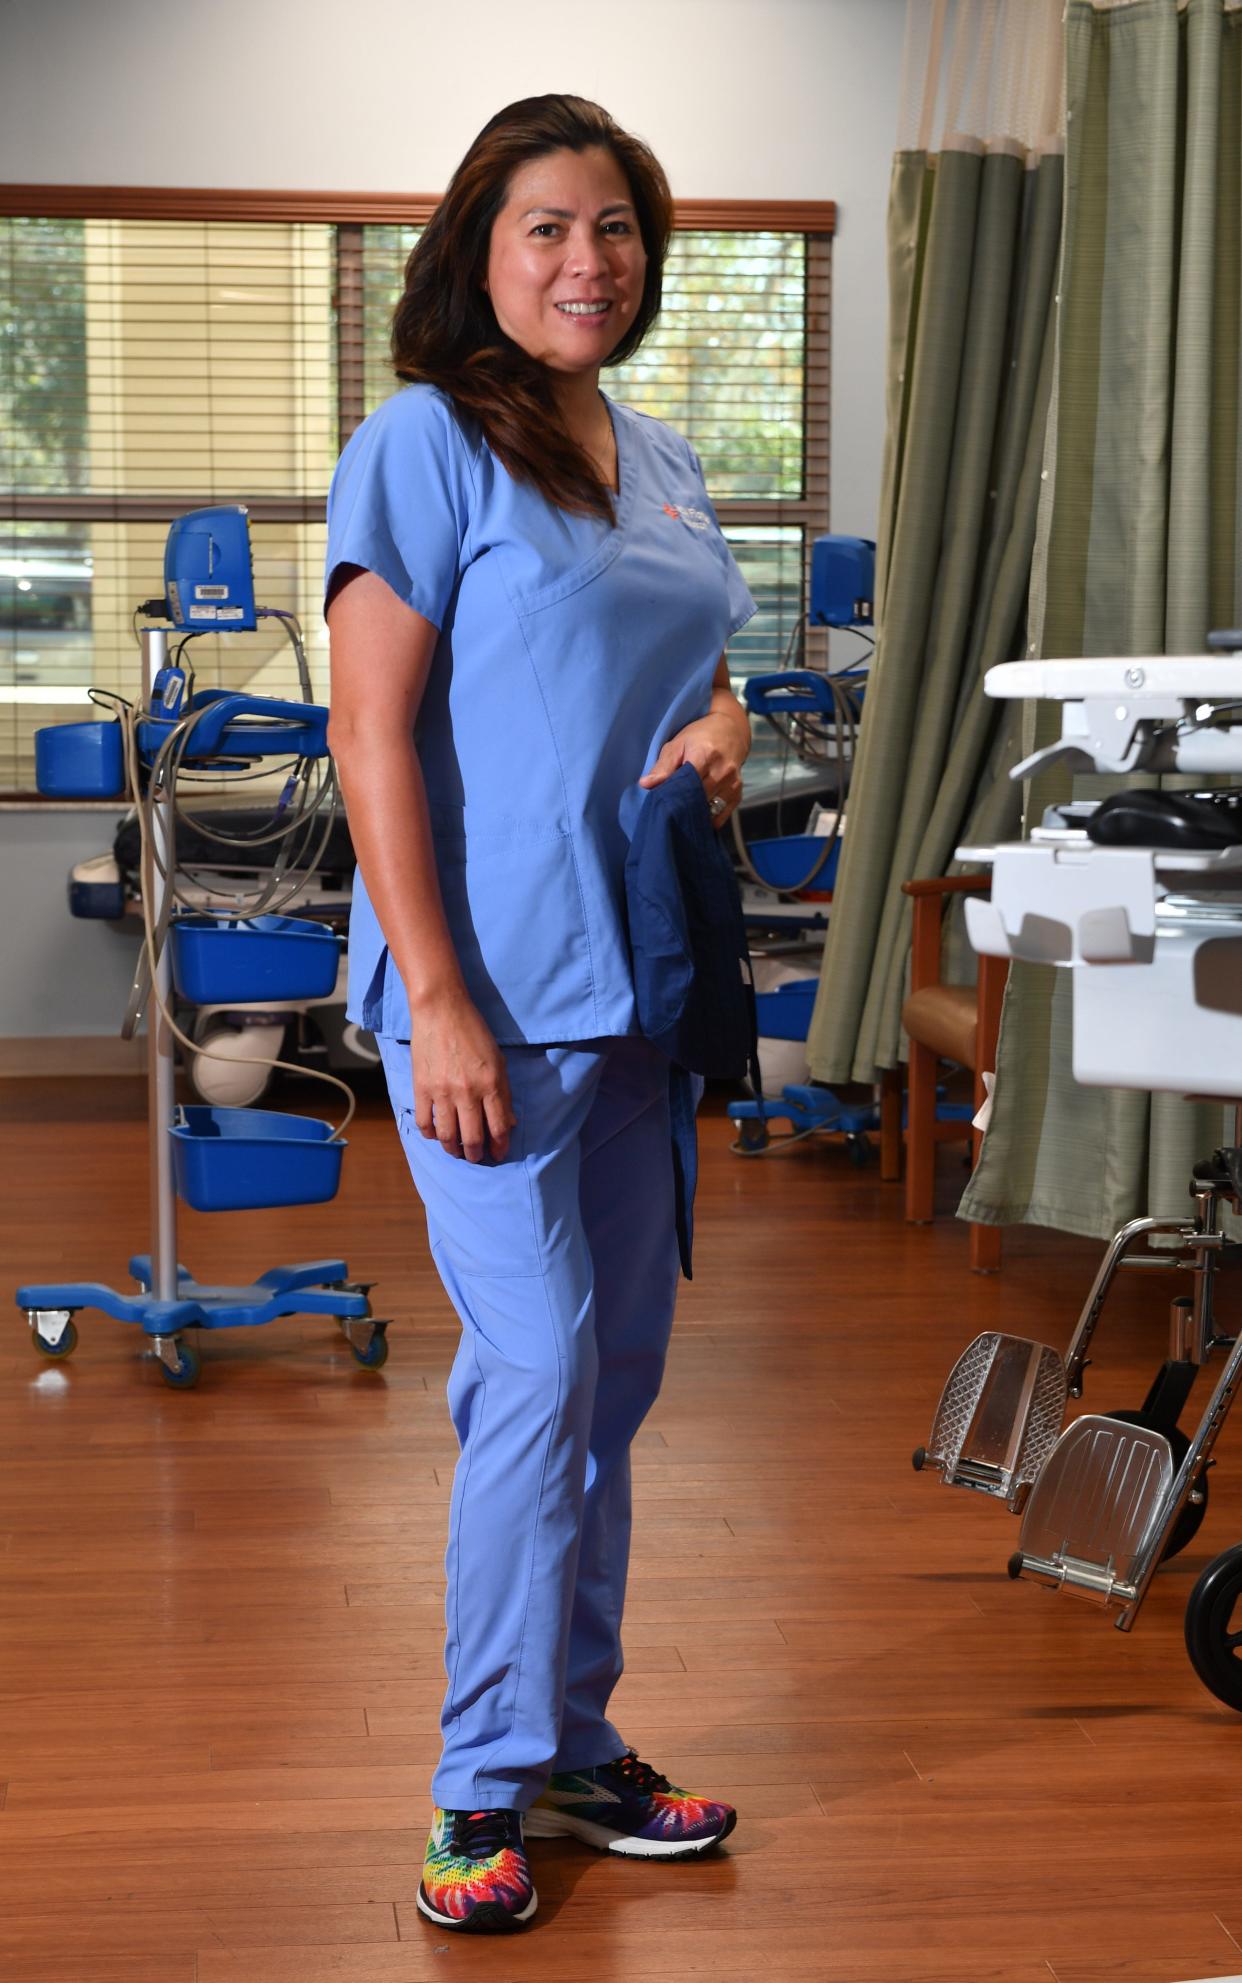 Henrissa Summers is a surgical technologist at HCA Florida Sarasota Doctors Hospital. After suffering a mini-stroke in 2014, a doctors suggestion that she walk at least 500 steps a day, set her down a path that led to half-marathons, marathons and finally ultra marathons.